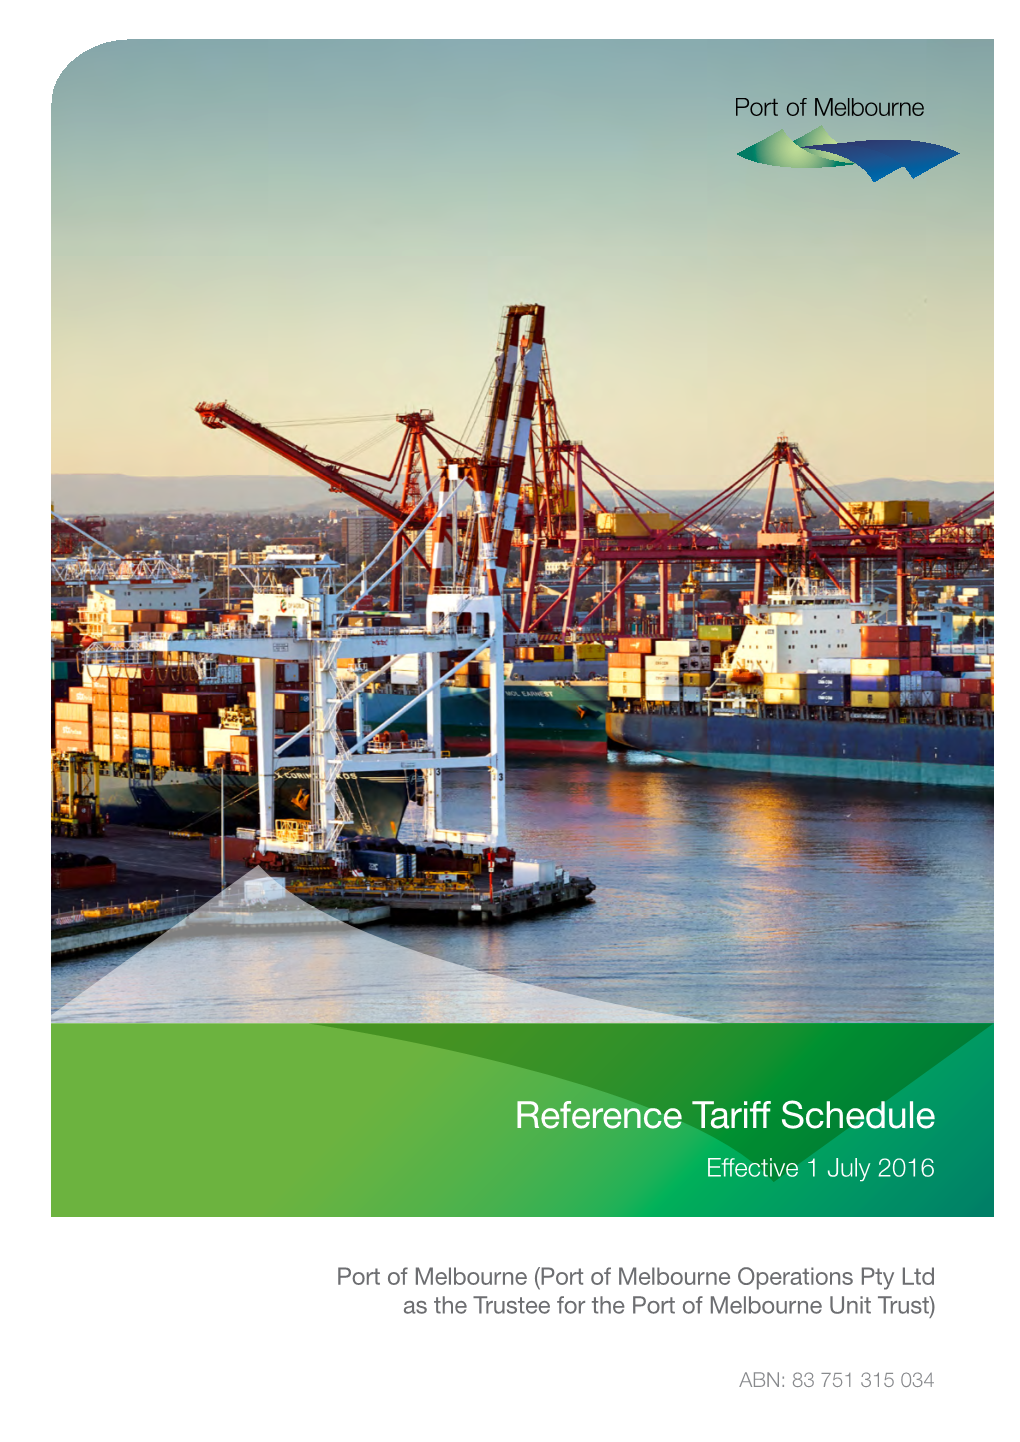 Reference Tariff Schedule Effective 1 July 2016